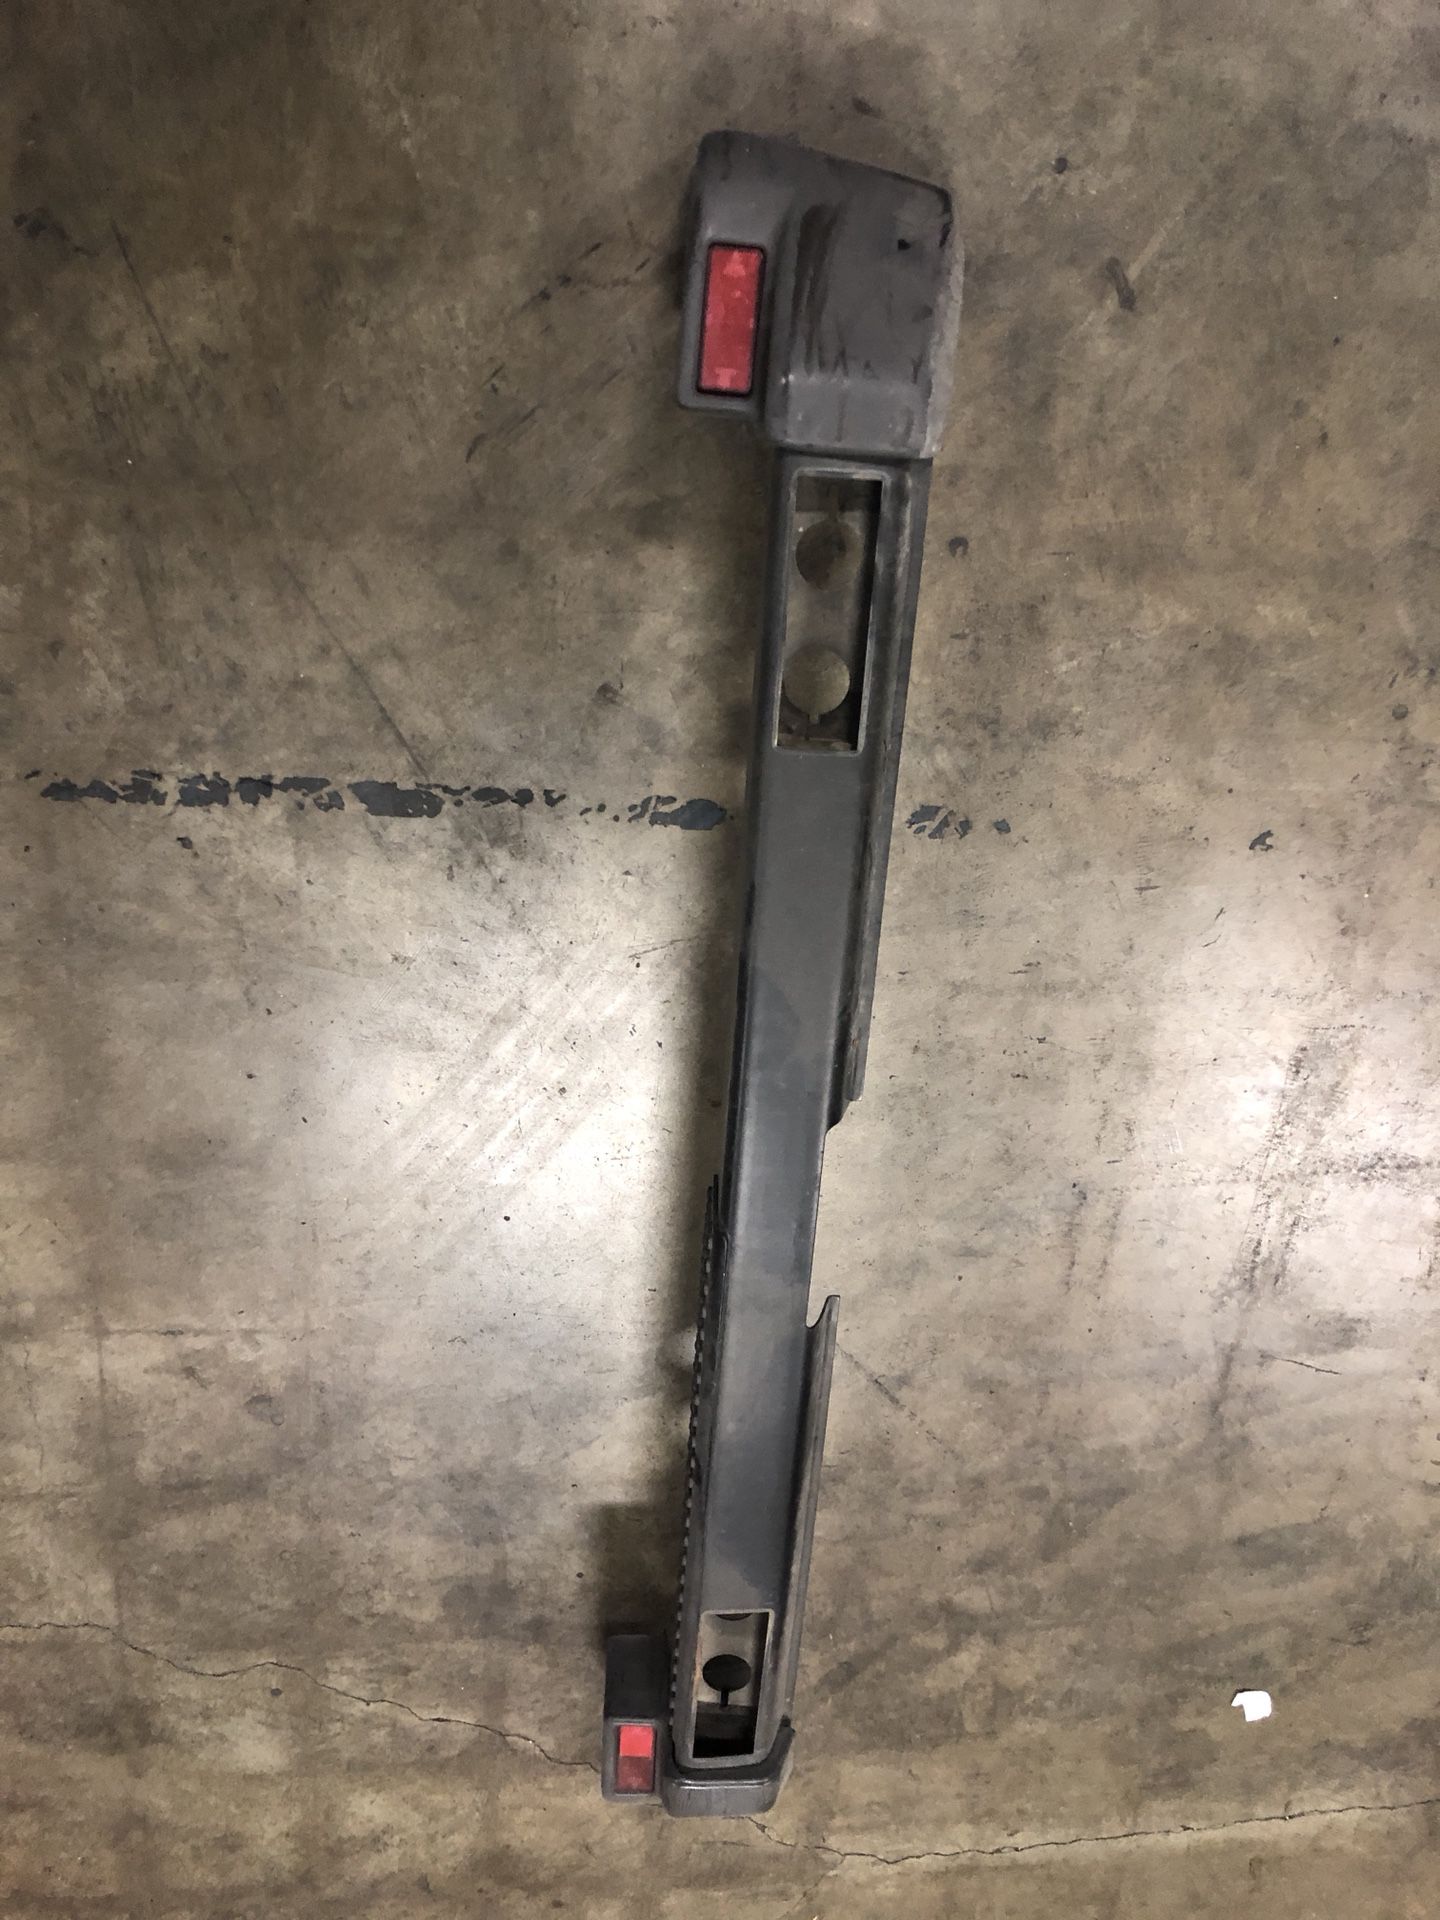 1995 Land Rover Discovery 1 bumper